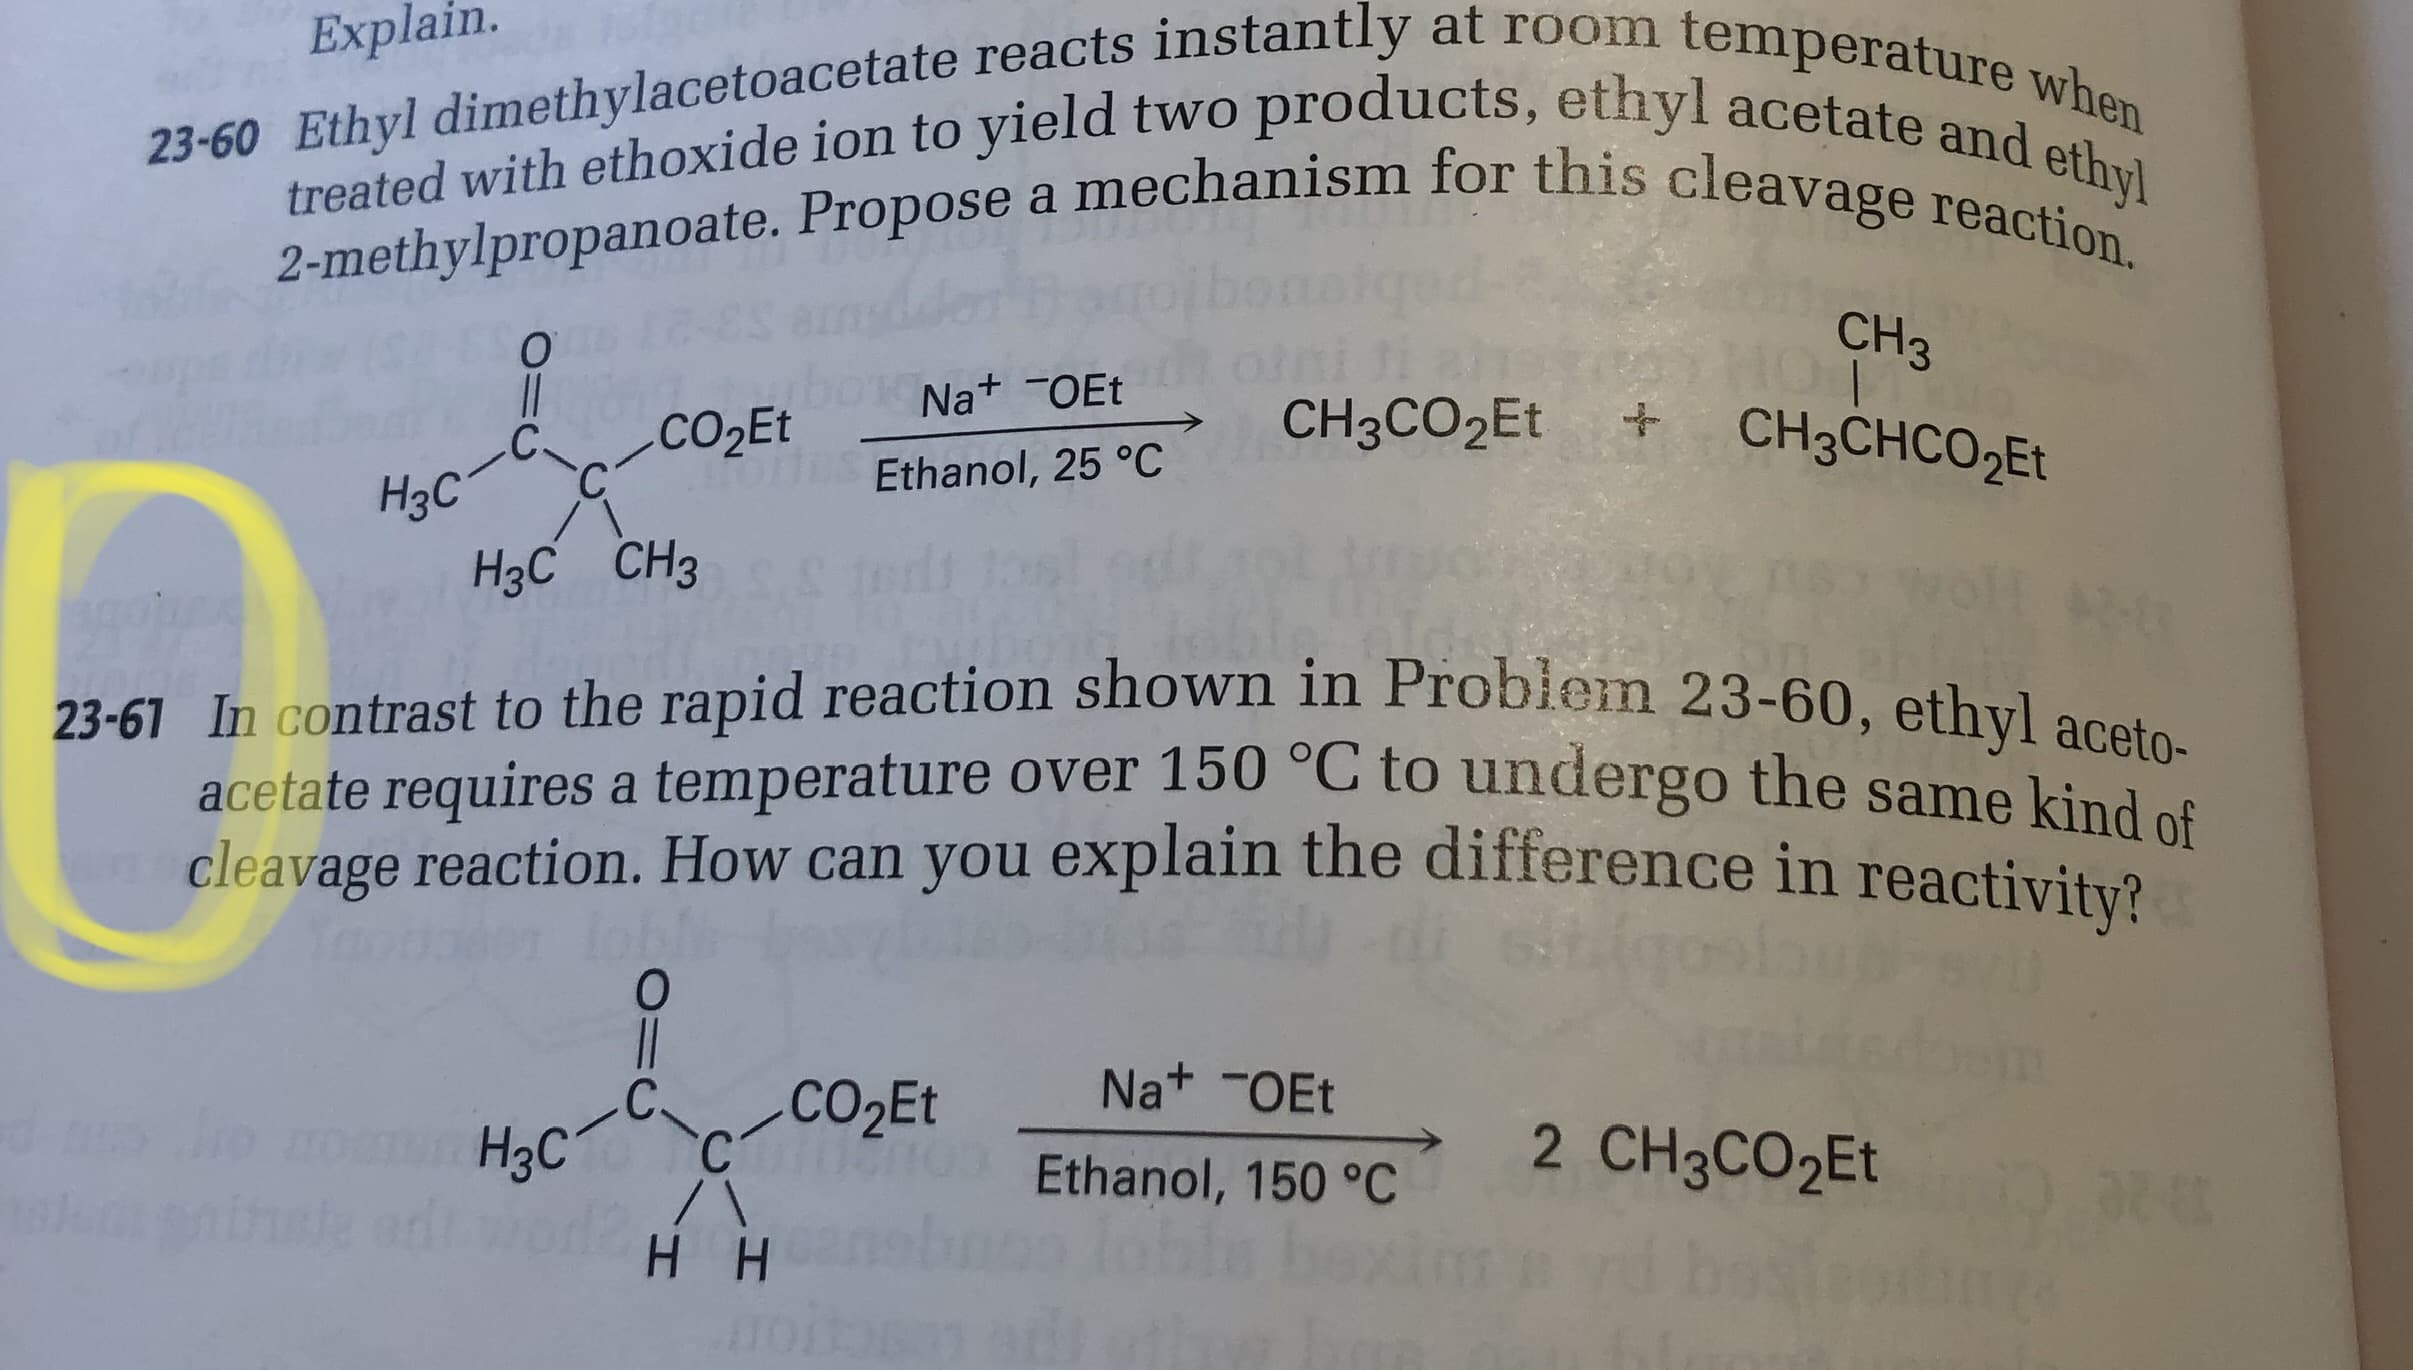 obiem 23-60, ethyl aceto-
In contrast to the rapid reaction shown in Probiem 23-60, ethv] aceta
acetate requires a temperature over 150 °C to undergo the same kind
cleavage reaction. How can you explain the difference in reactivity?
loem
C.
H3C
CO2E
Na+ -OEt
2 CH3CO2ET
Ethanol, 150 °C
H H
